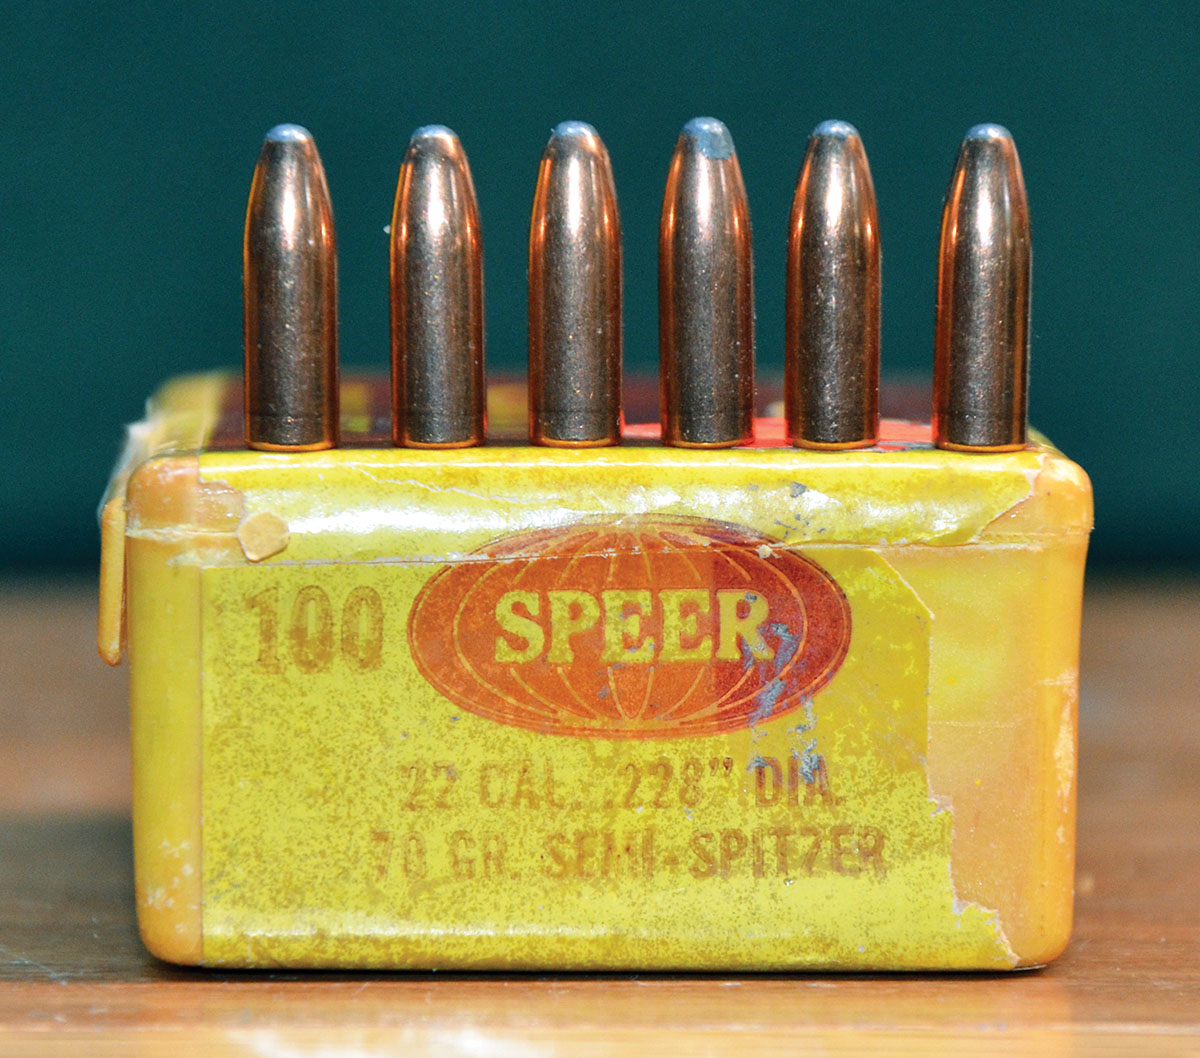 Of jacketed bullets made in the past for the 22 Hi-Power, the Speer 70-grain bullet with its .228-inch diameter was tops in accuracy due to its quality and a length that was adequately stabilized in flight by barrels with a 1:12 rifling twist rate. A gun store label with a price of $6.25 indicates how long ago Layne purchased this box.